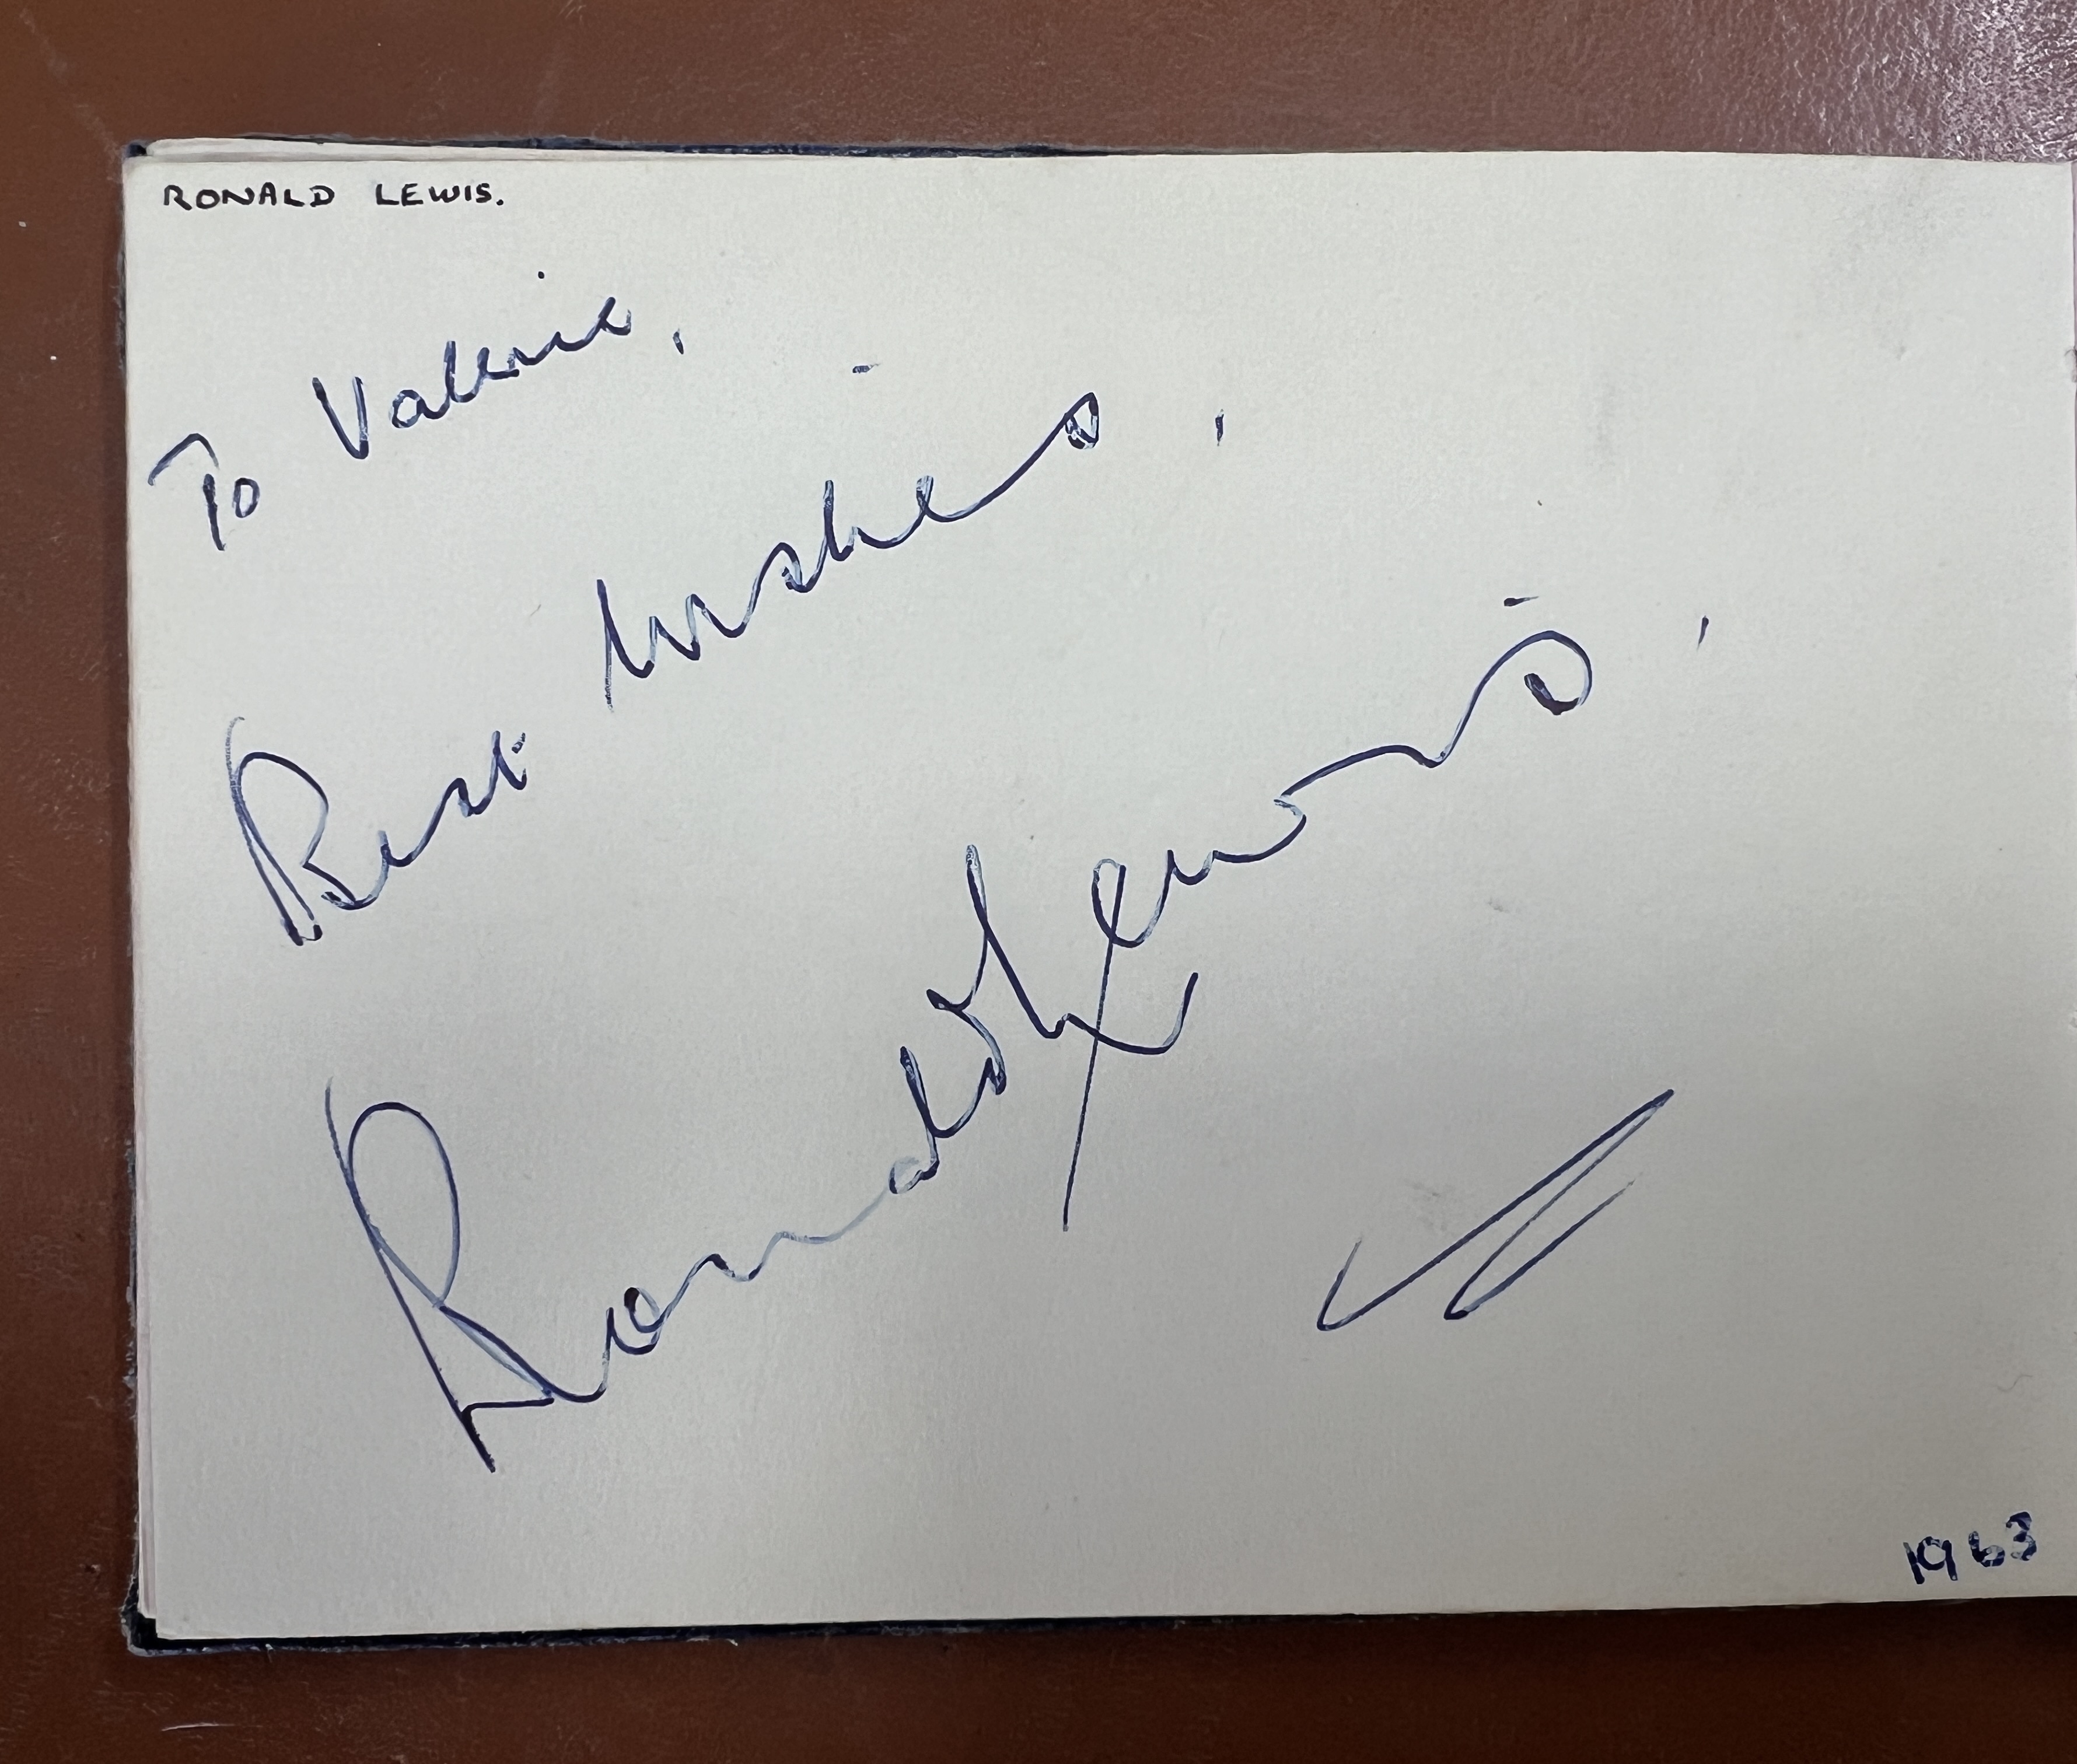 A 1960's autograph album containing autographs of various celebrities including Cliff Richard, - Image 9 of 37